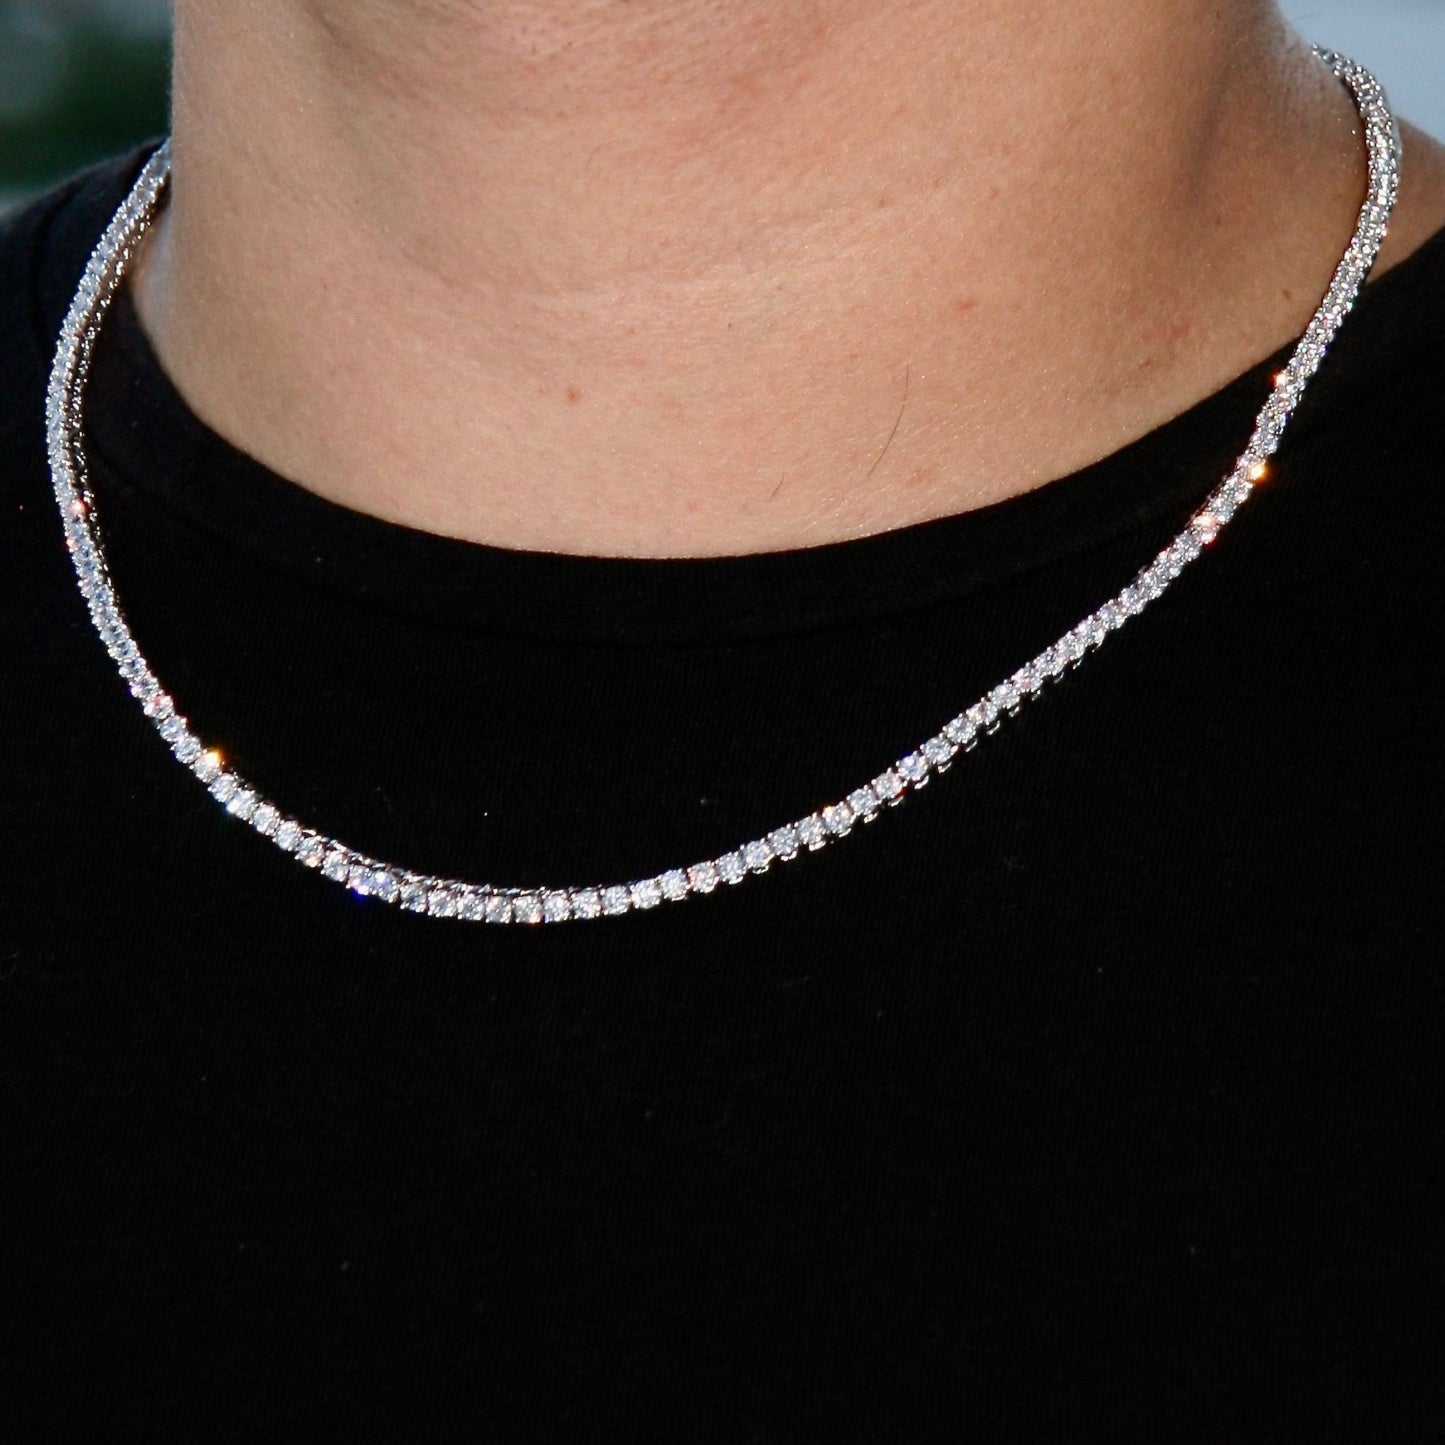 3MM WHITE GOLD PLATED TENNIS CHAIN